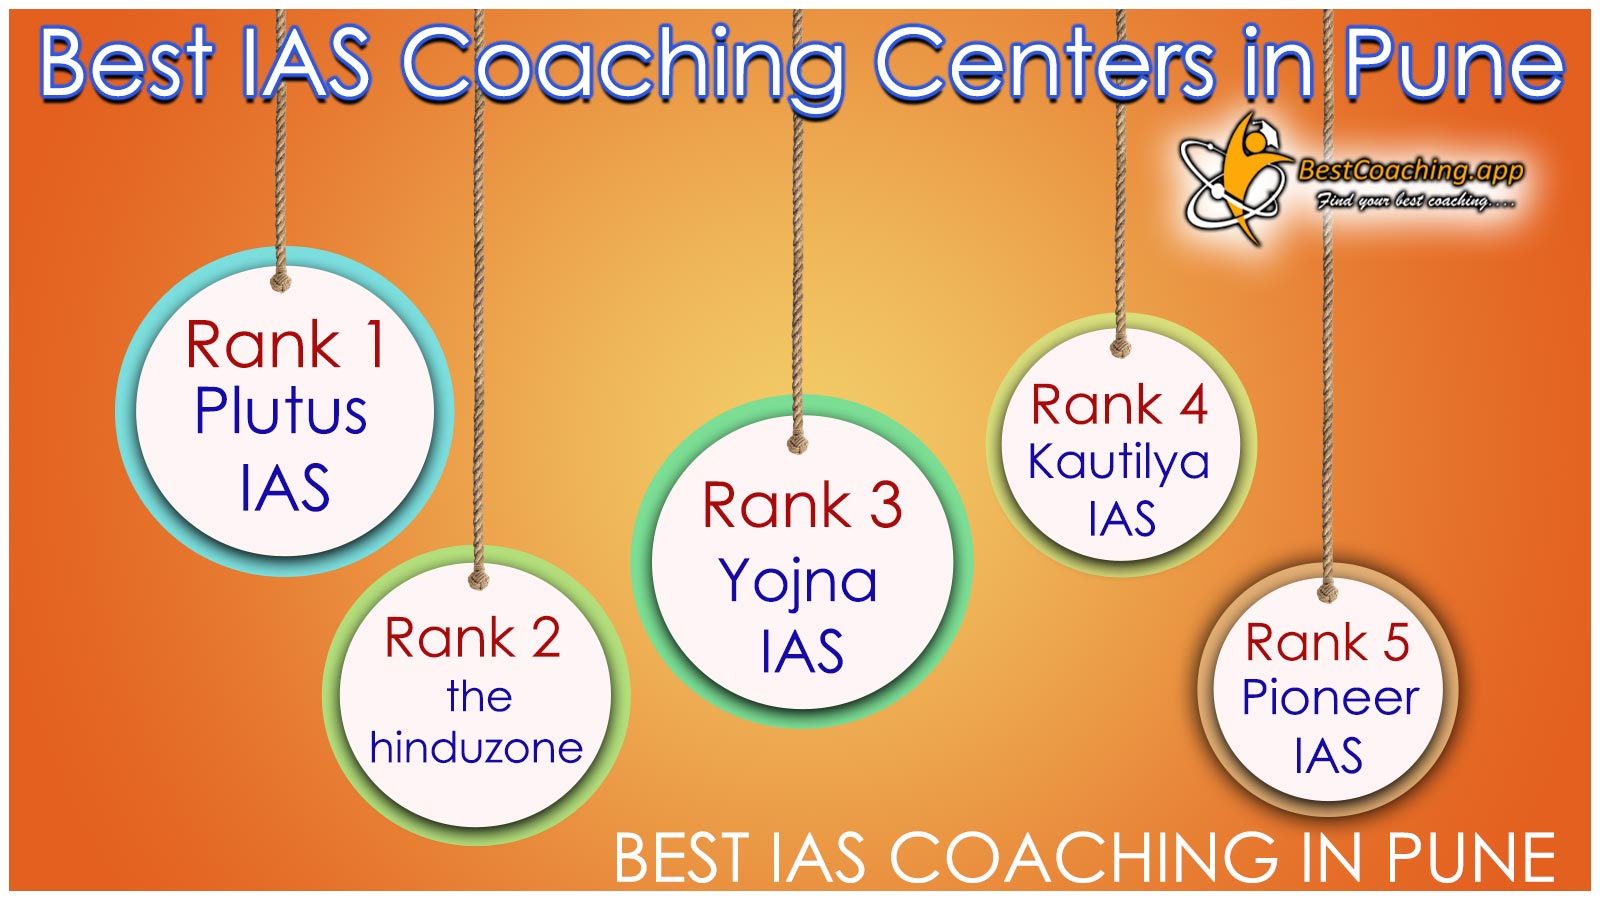 Best IAS Coaching Centers in Pune